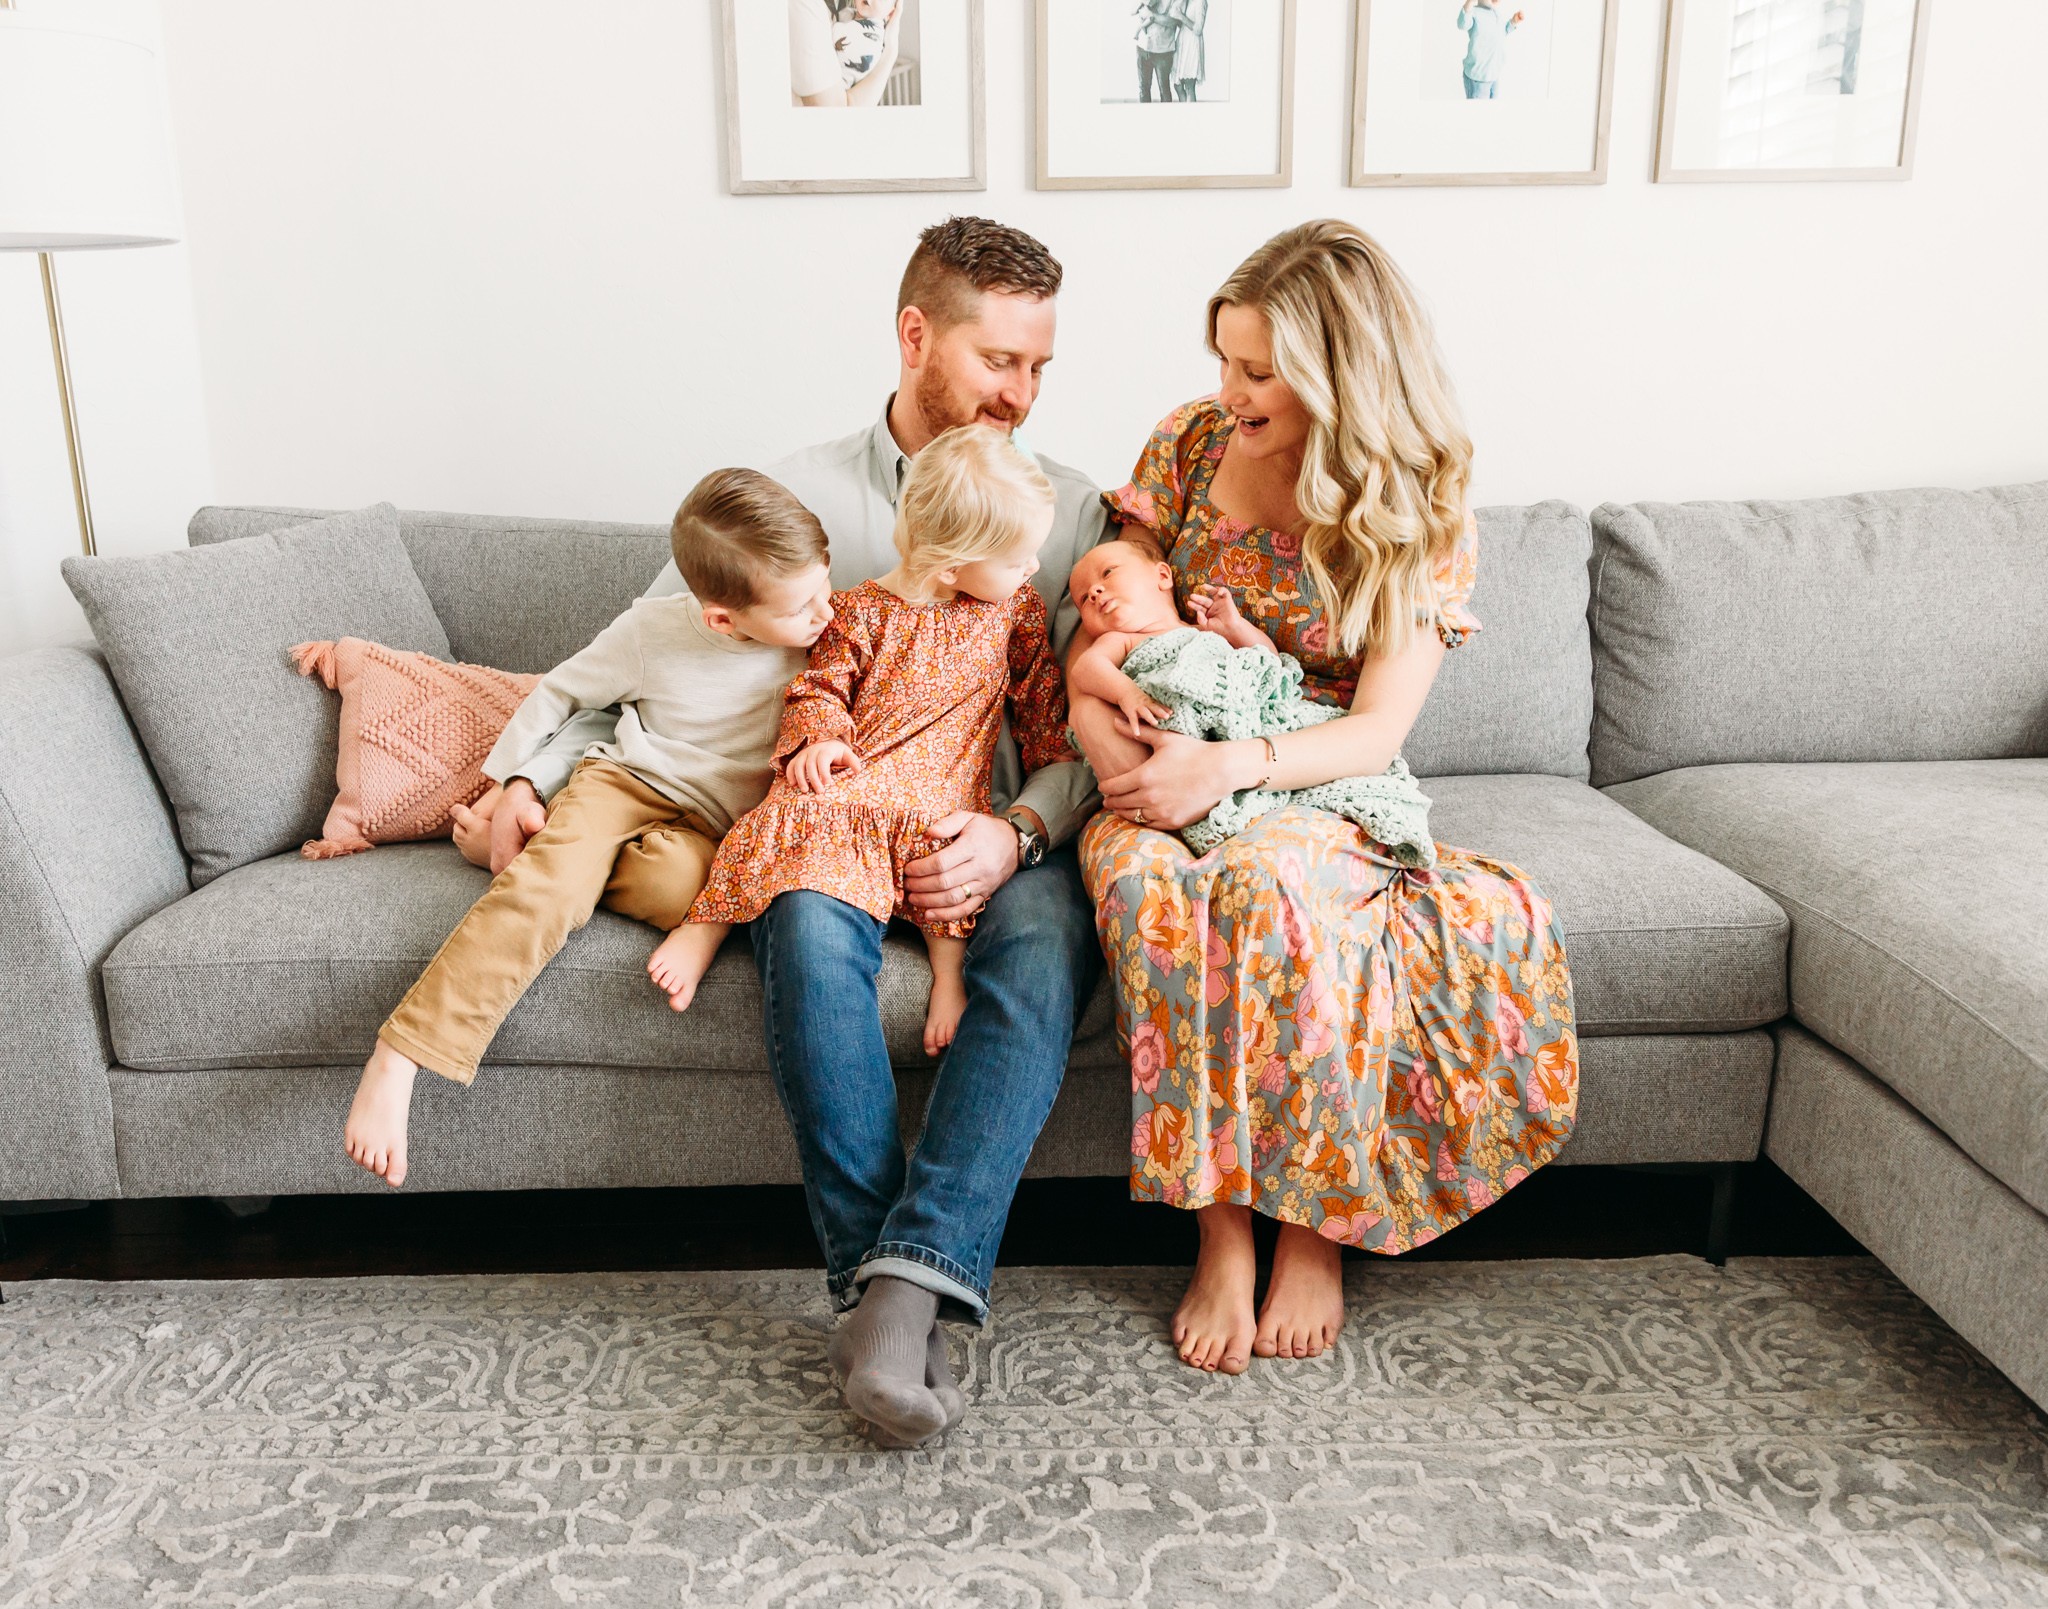 Picture of family on a couch with newborn.